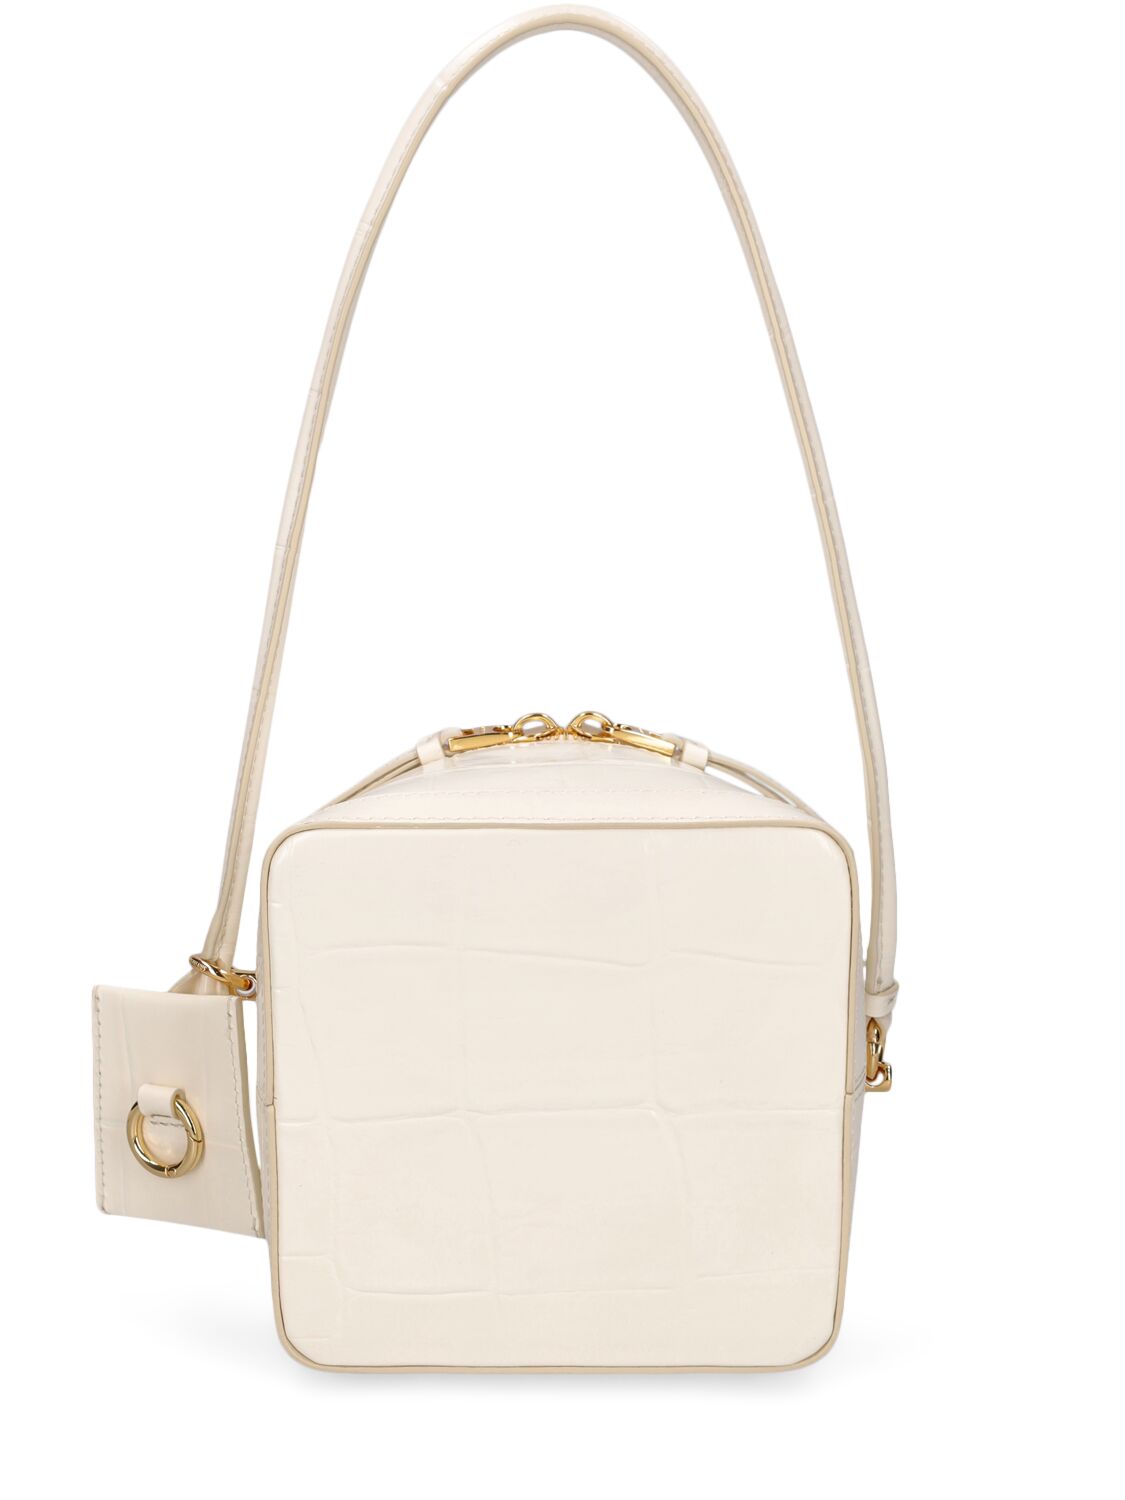 Shop Jacquemus Le Vanito Croc Embossed Leather Bag In Light Ivory